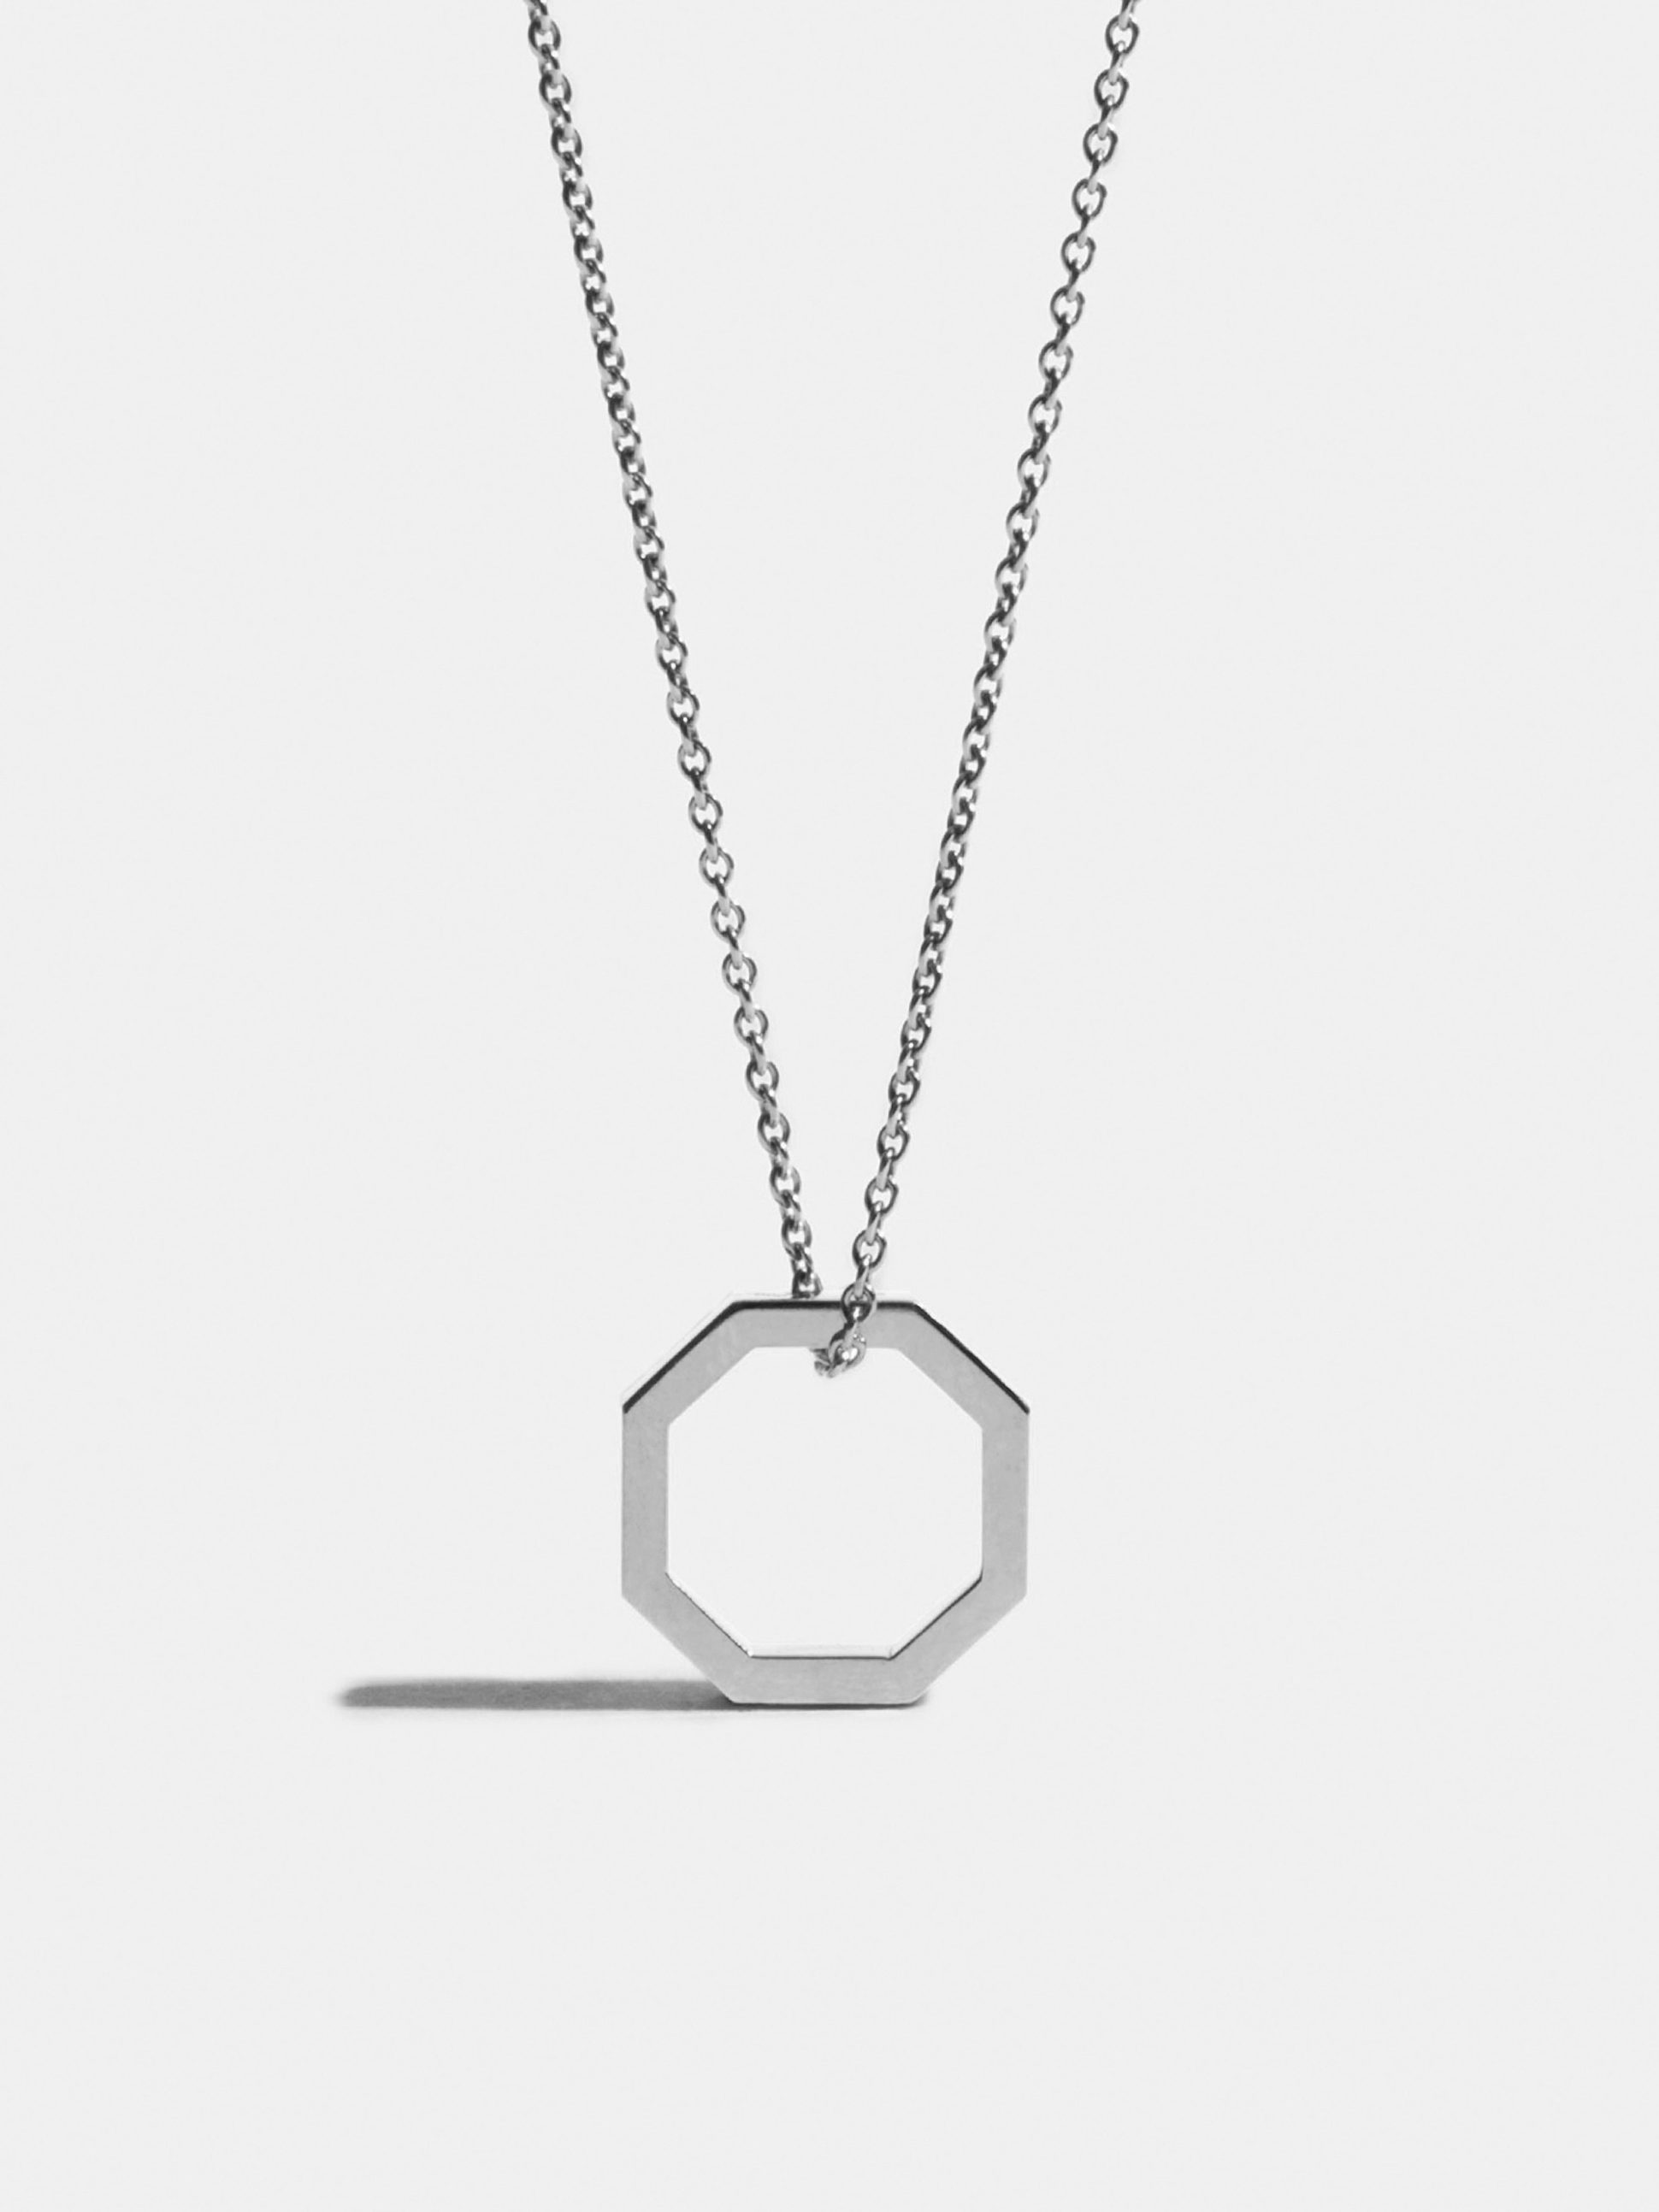 Octogone 14mm pendant in 18k Fairmined ethical white gold, on a chain.